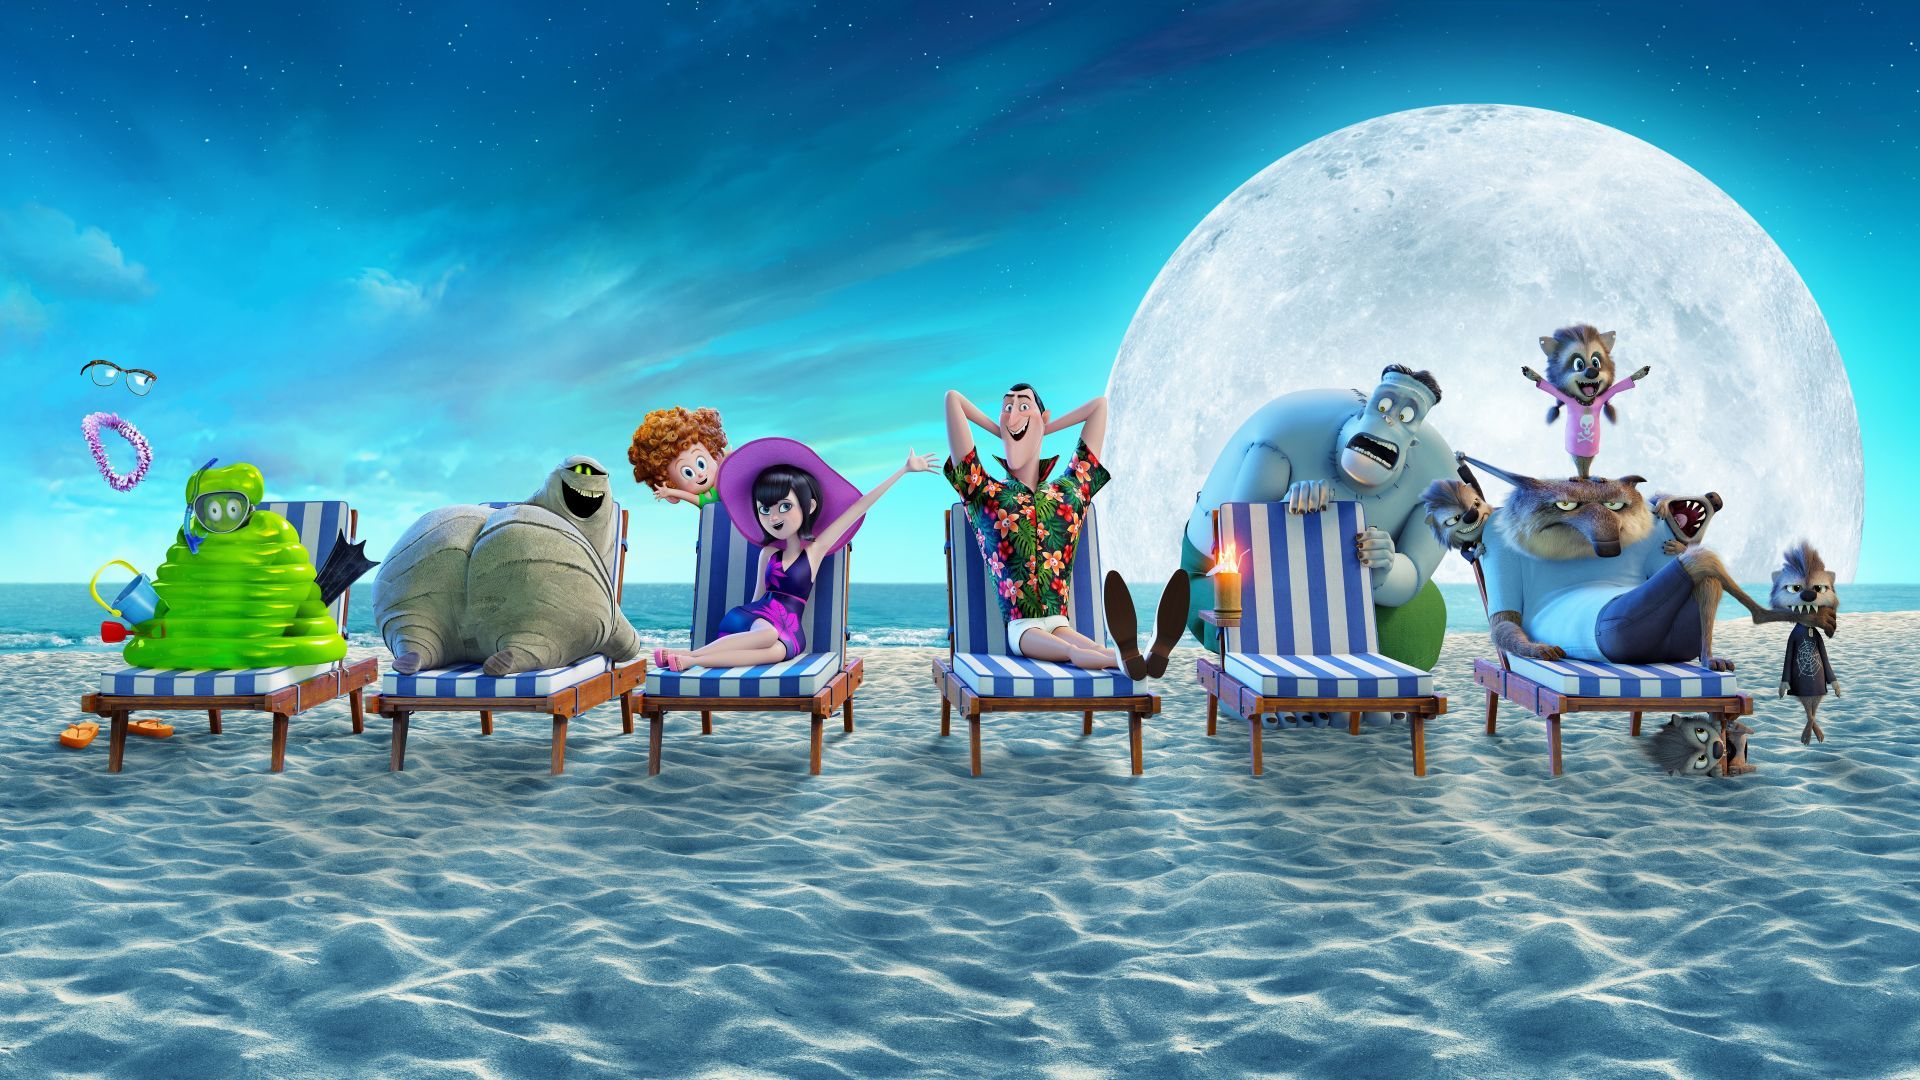 Desktop wallpaper hotel transylvania 3: summer vacation, holiday, vacations, animated move, HD image, picture, background, 6377fa